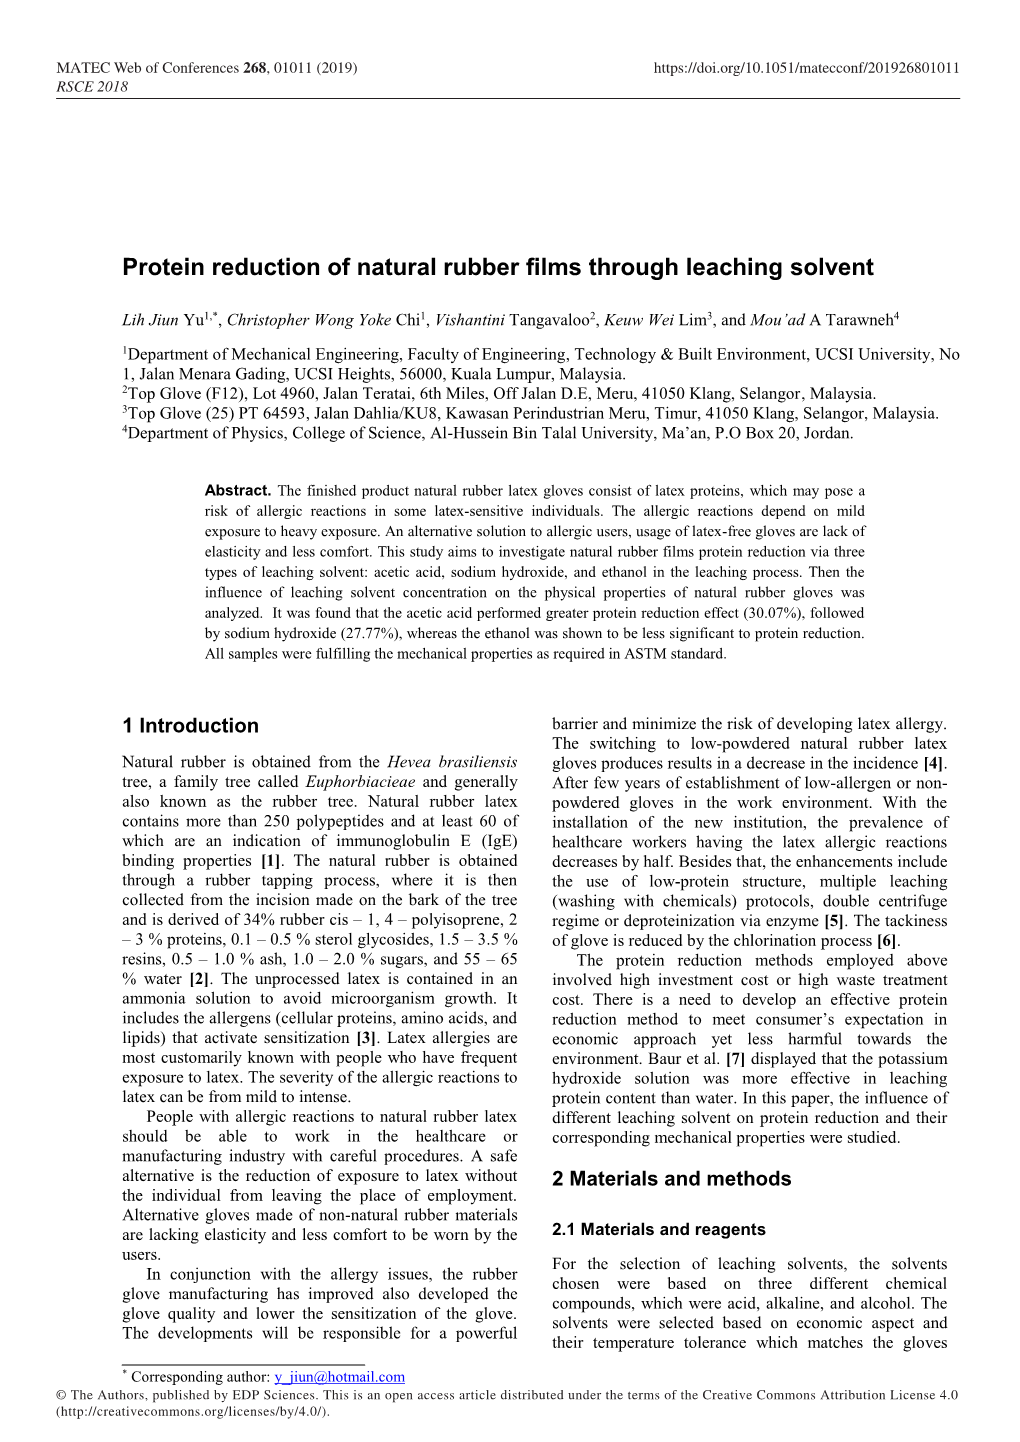 Protein Reduction of Natural Rubber Films Through Leaching Solvent